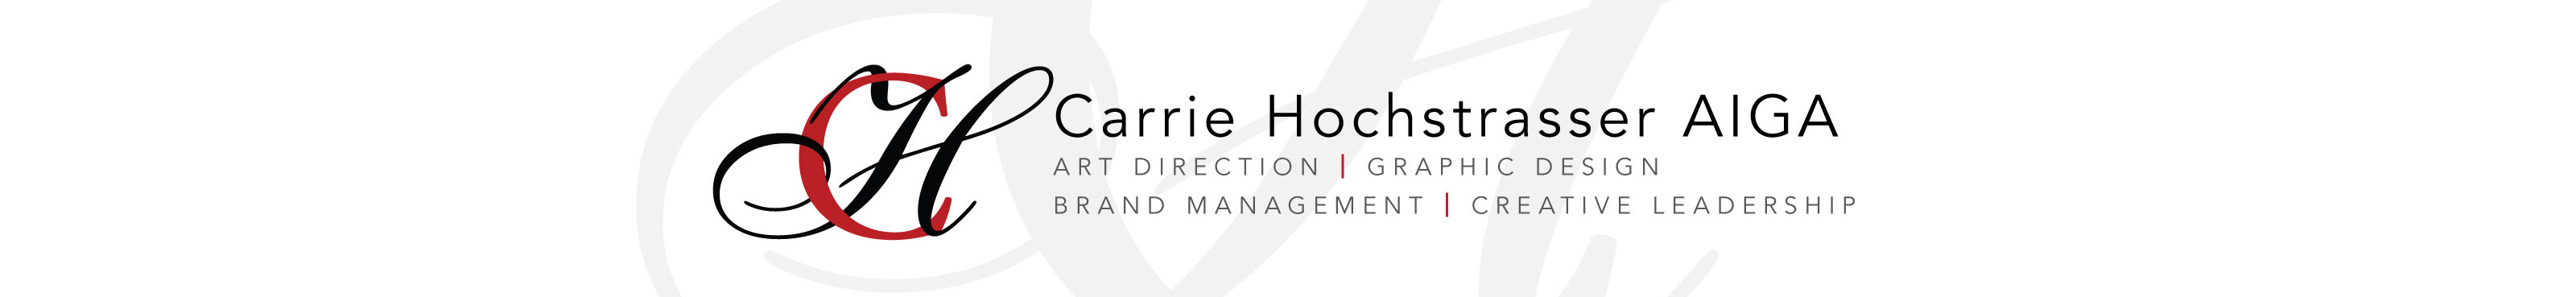 Carrie Hochstrasser, MBA, AIGA's profile banner